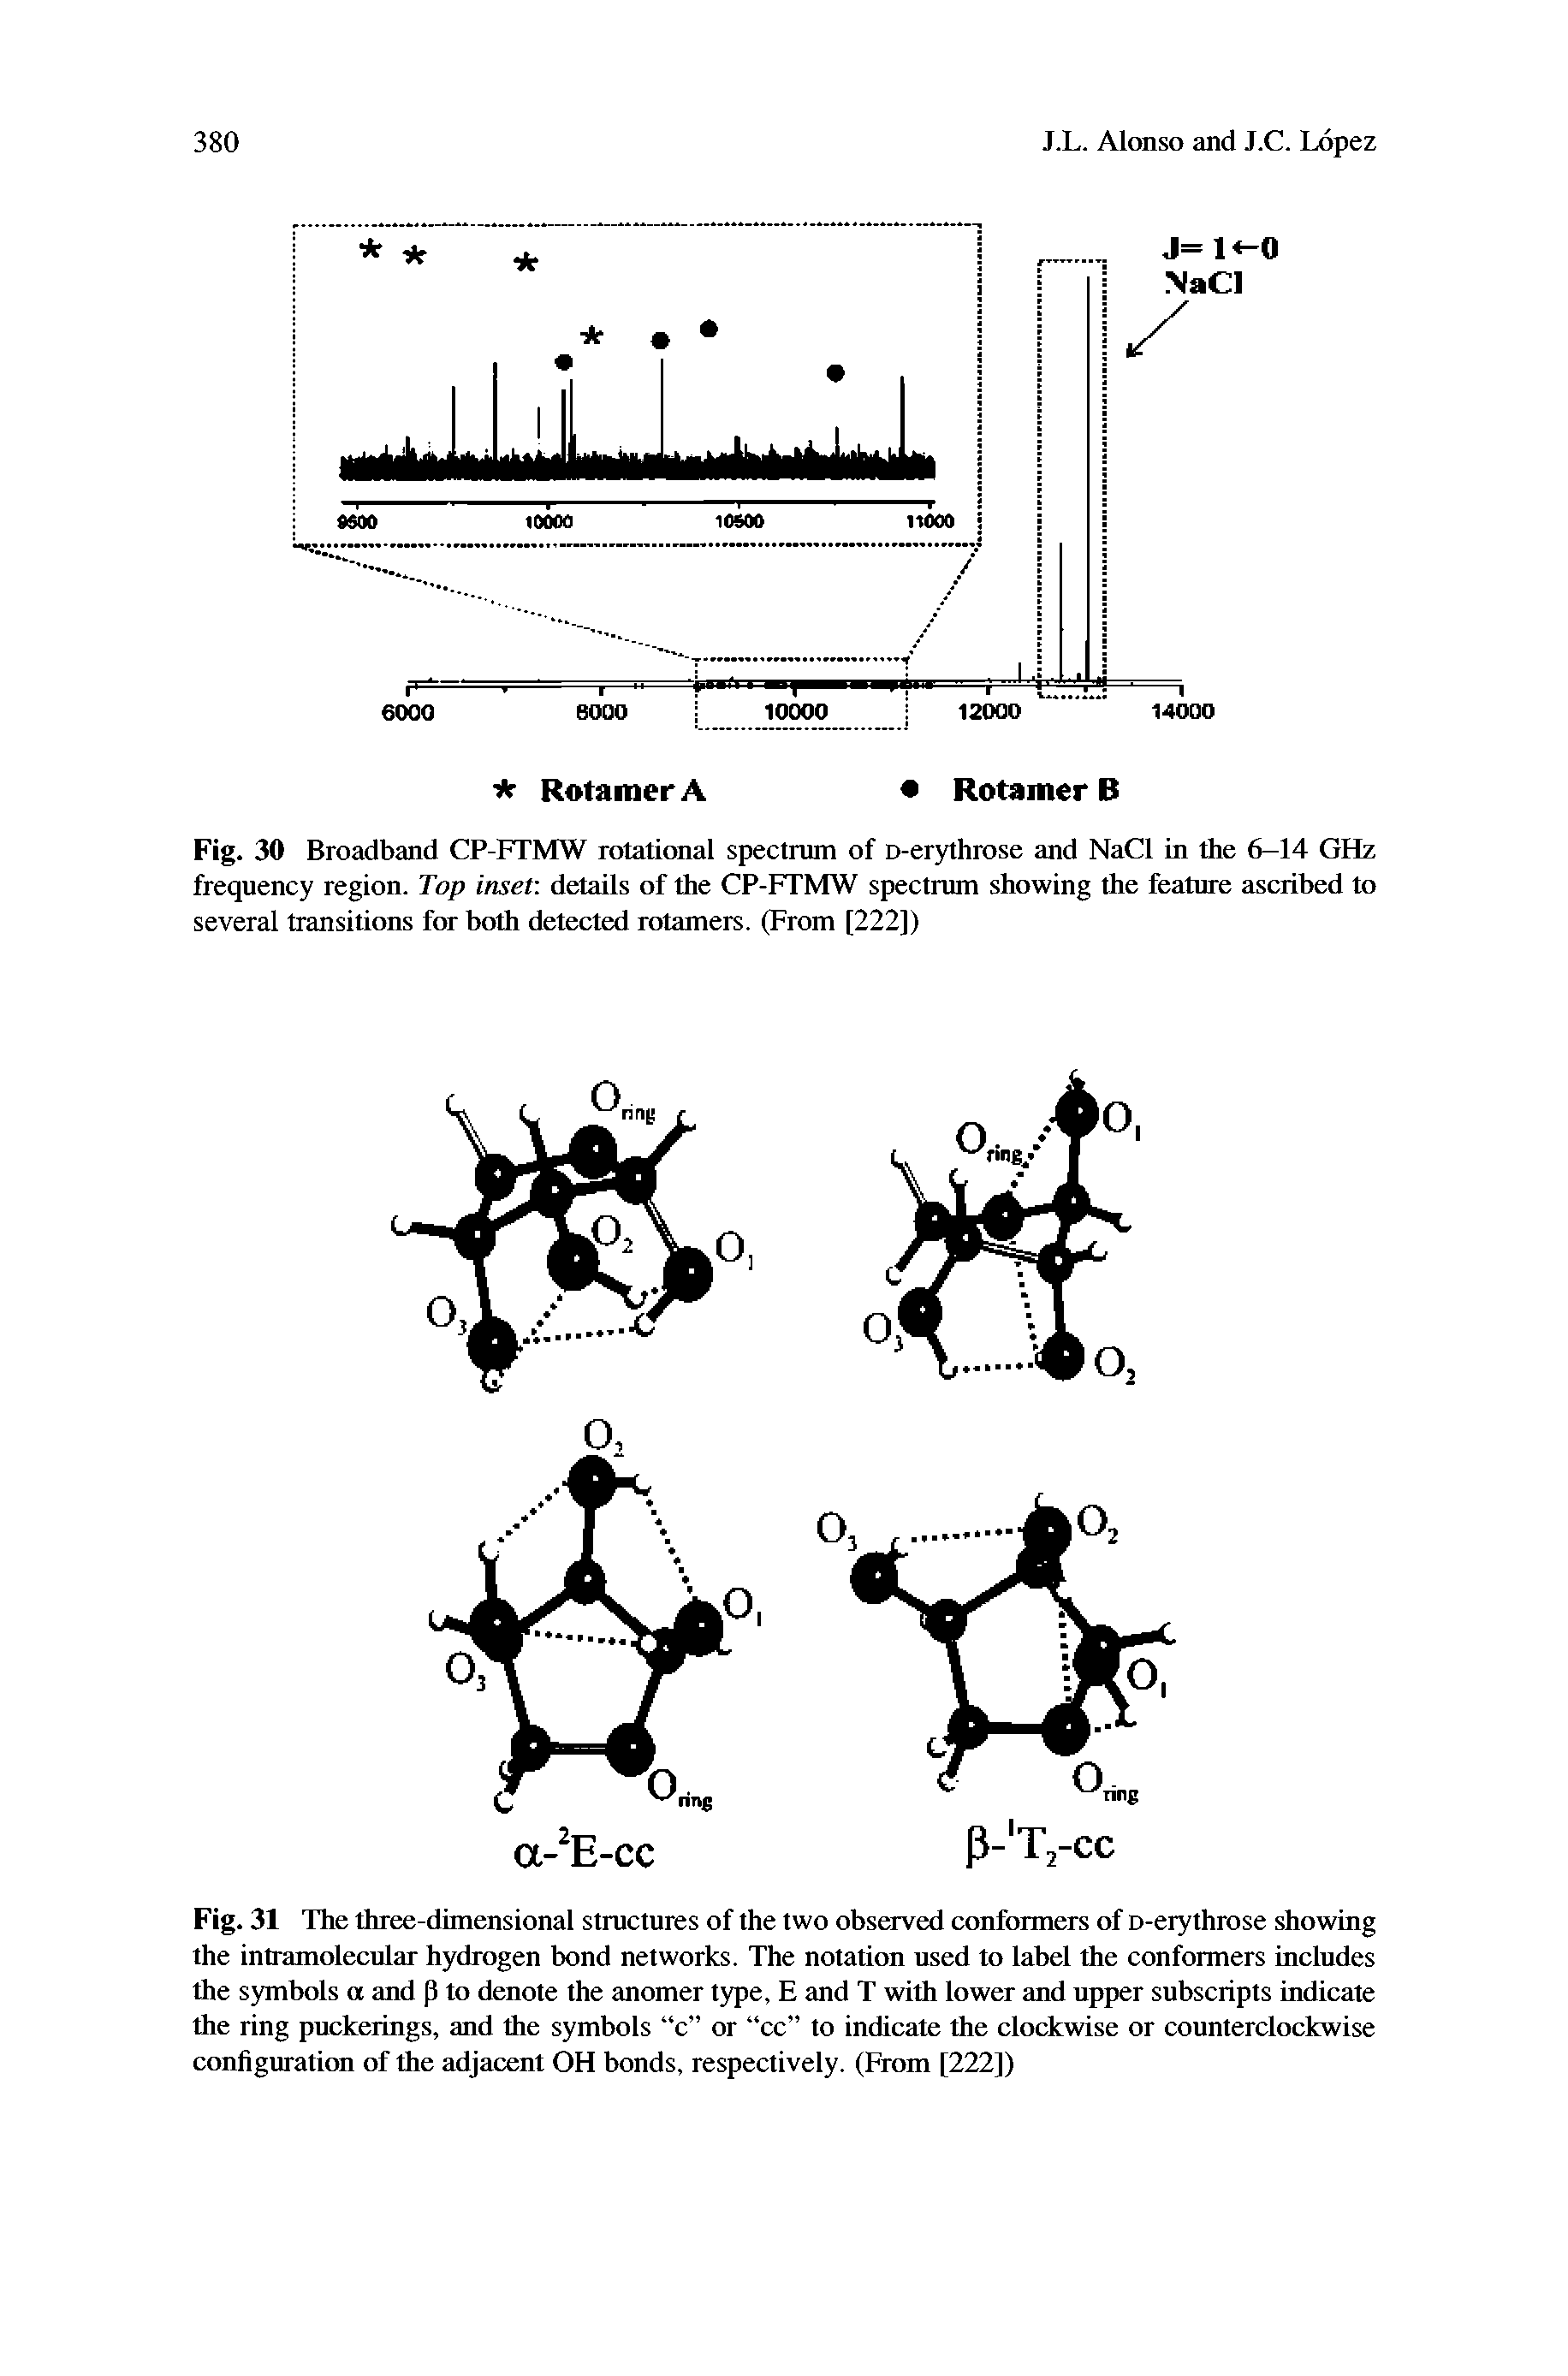 Fig. 31 The three-dimensional structures of the two observed conformers of D-erythrose showing the intramolecular hydrogen bond networks. The notation used to label the conformers includes the symbols o and p to denote the anomer type, E and T with lower and upper subscripts indicate the ring puckerings, and the symbols c or cc to indicate the clockwise or counterclockwise coniiguratitm of the adjacent OH bonds, respectively. (From [222])...